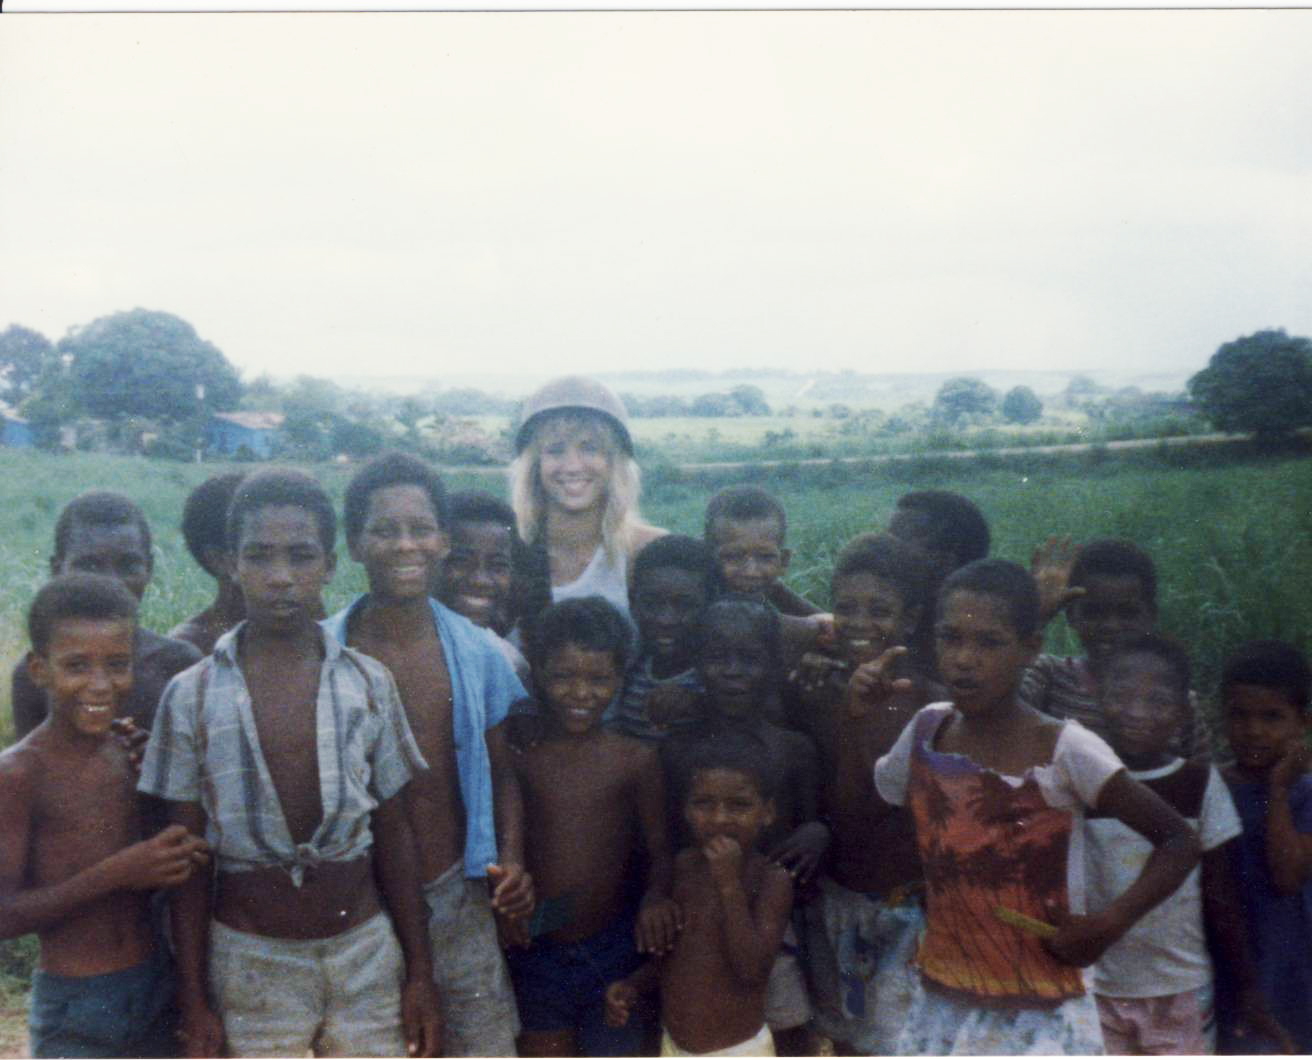 Sherrie Rose on set of Brothers in War in Haiti